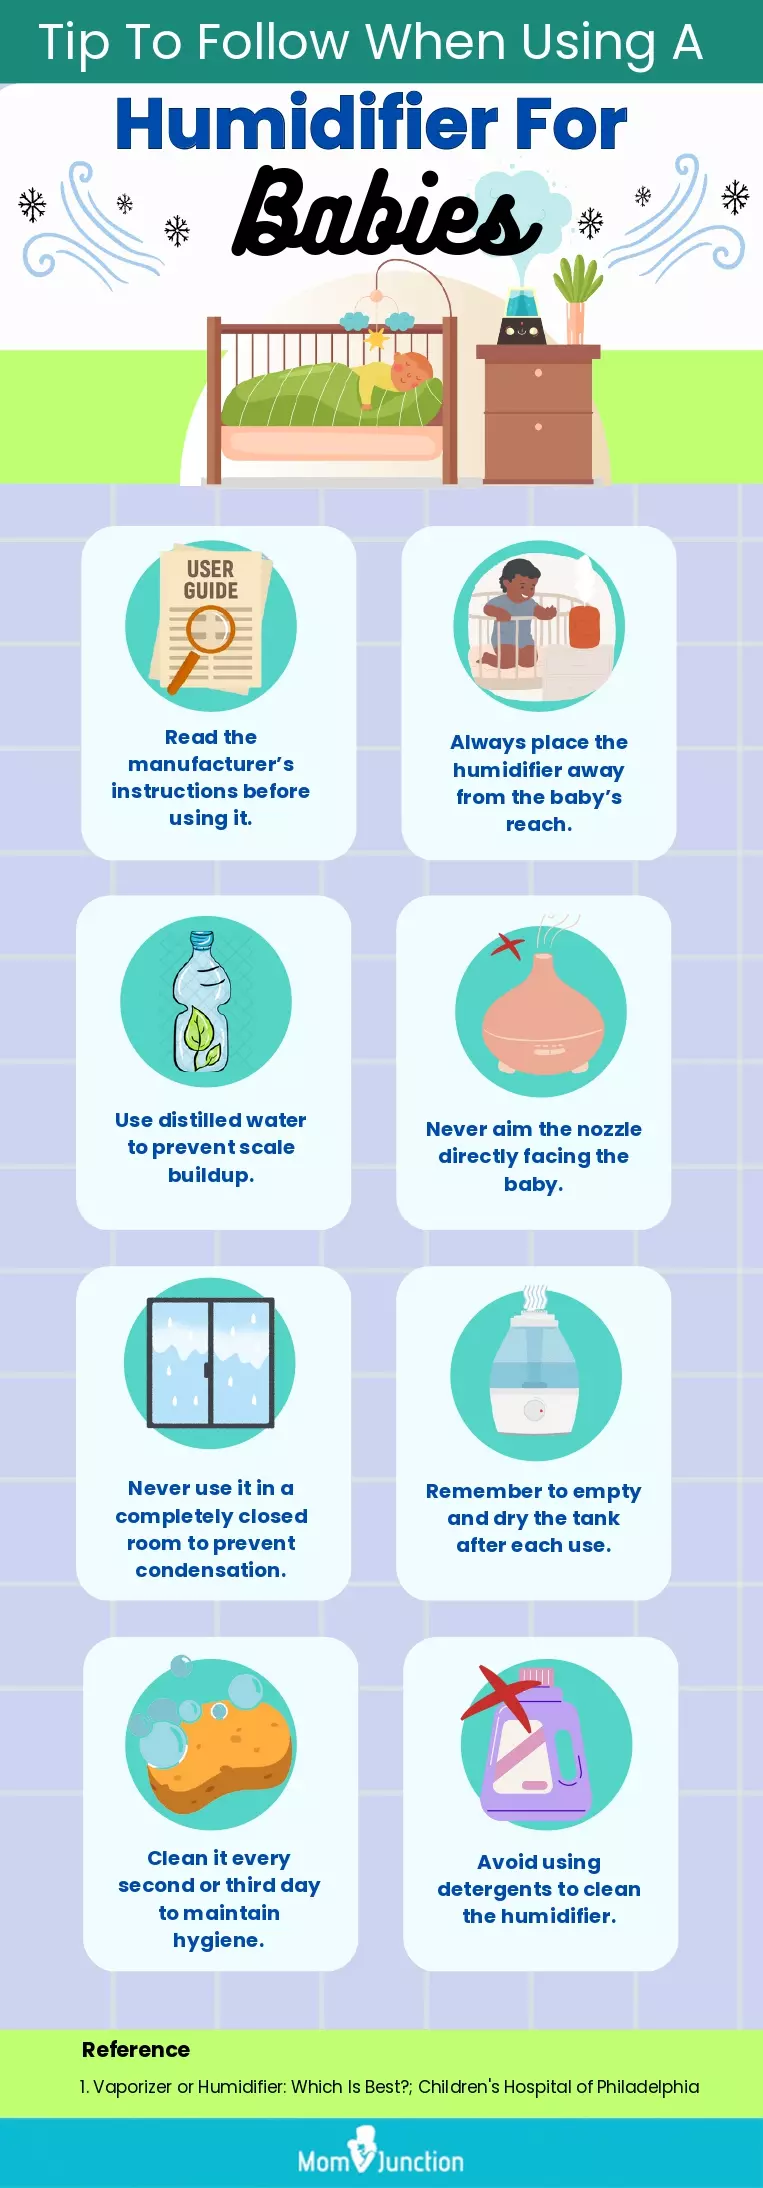 Tip To Follow When Using A Humidifier For Babies (infographic)